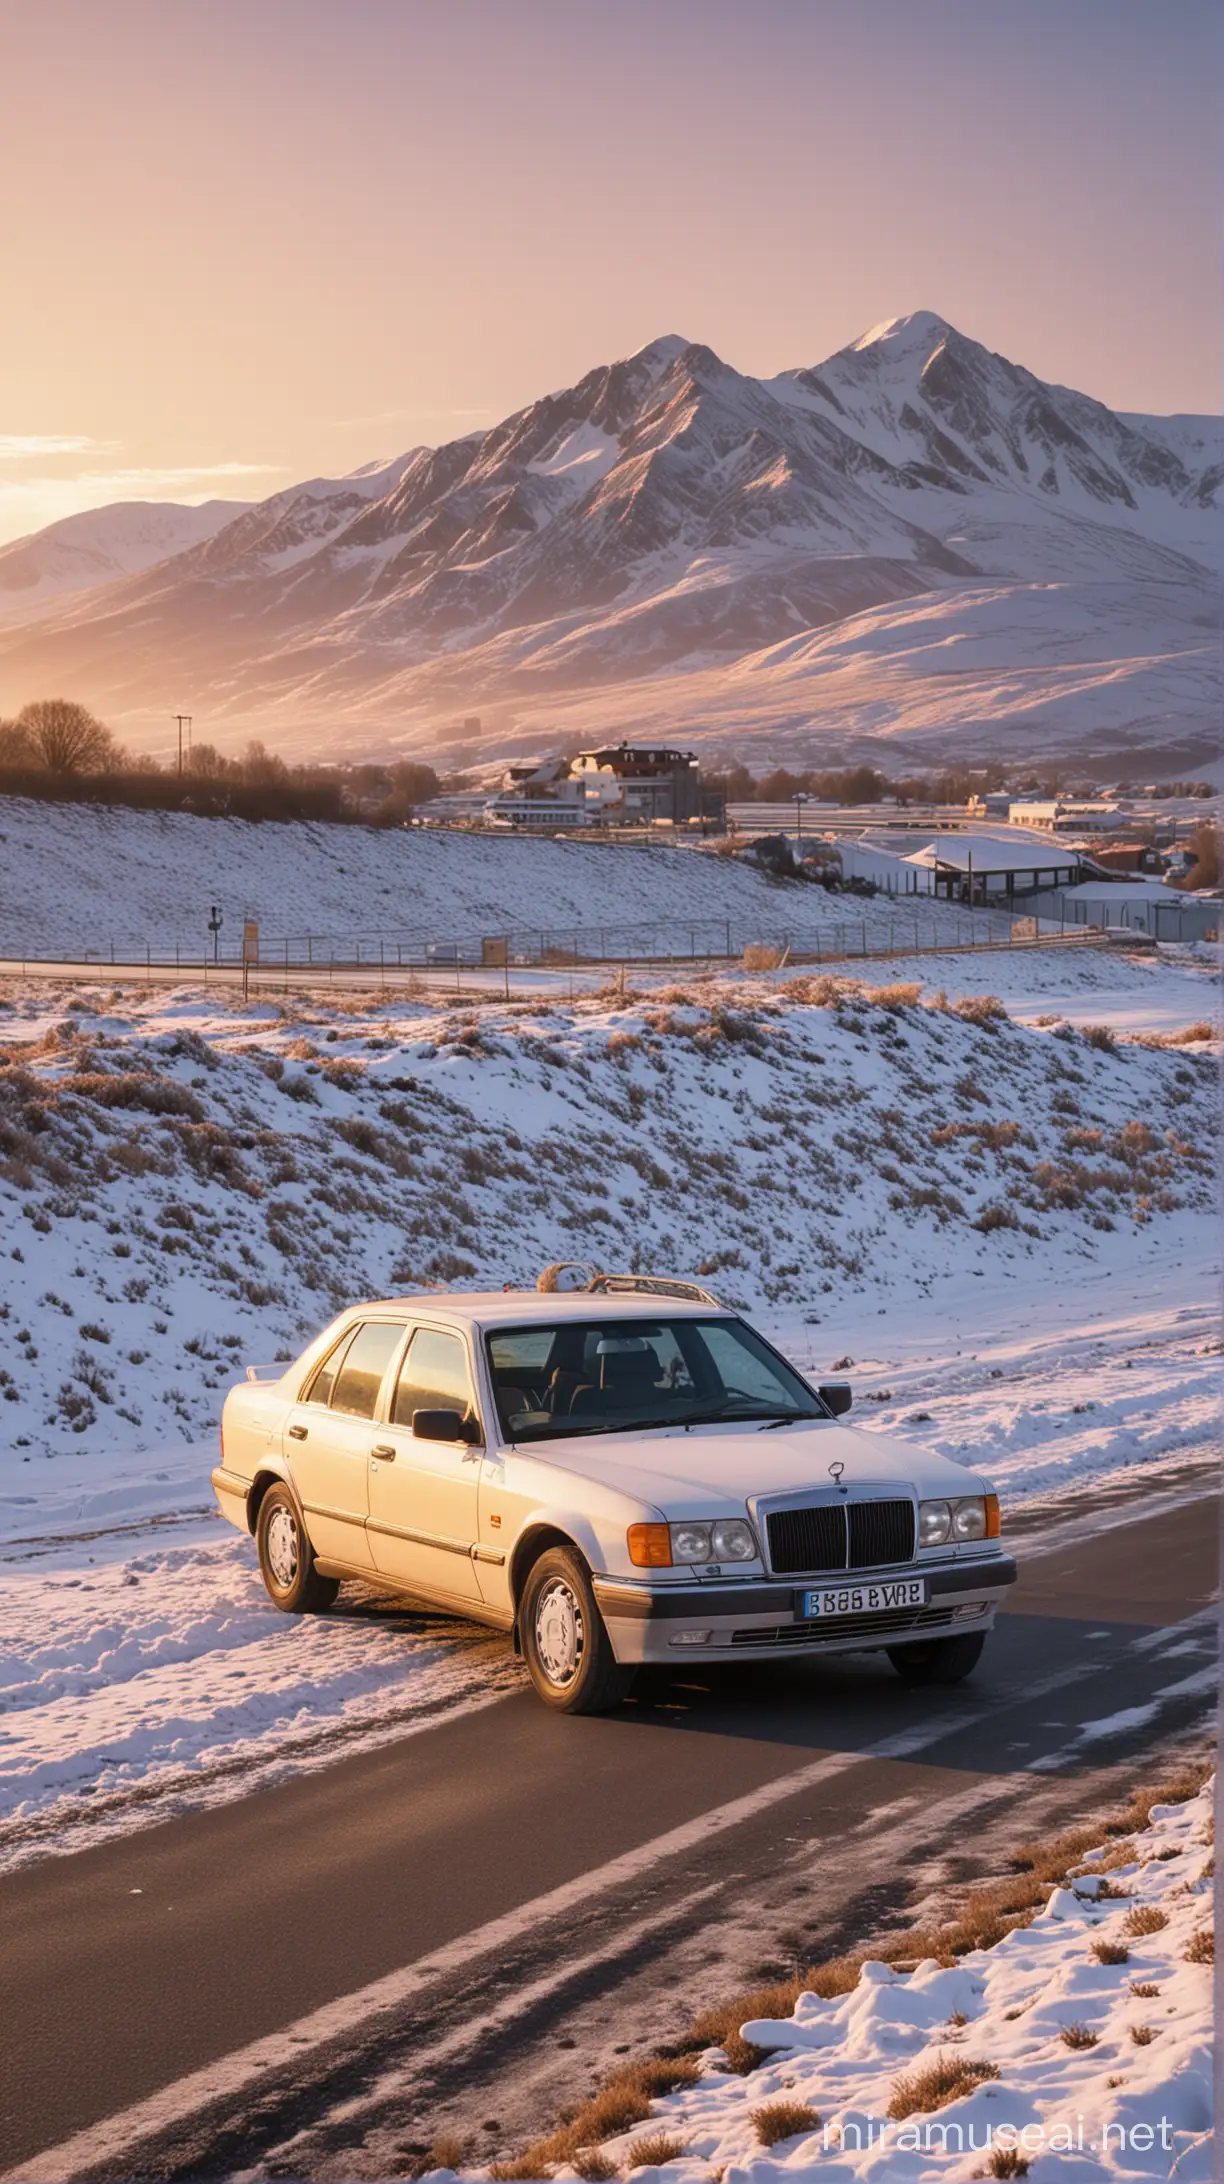 Professional photography. A 1995 Mercy boxer E220 W124 stopped on an empty intercity road. Sunset. Mountain with snow on its summit as background